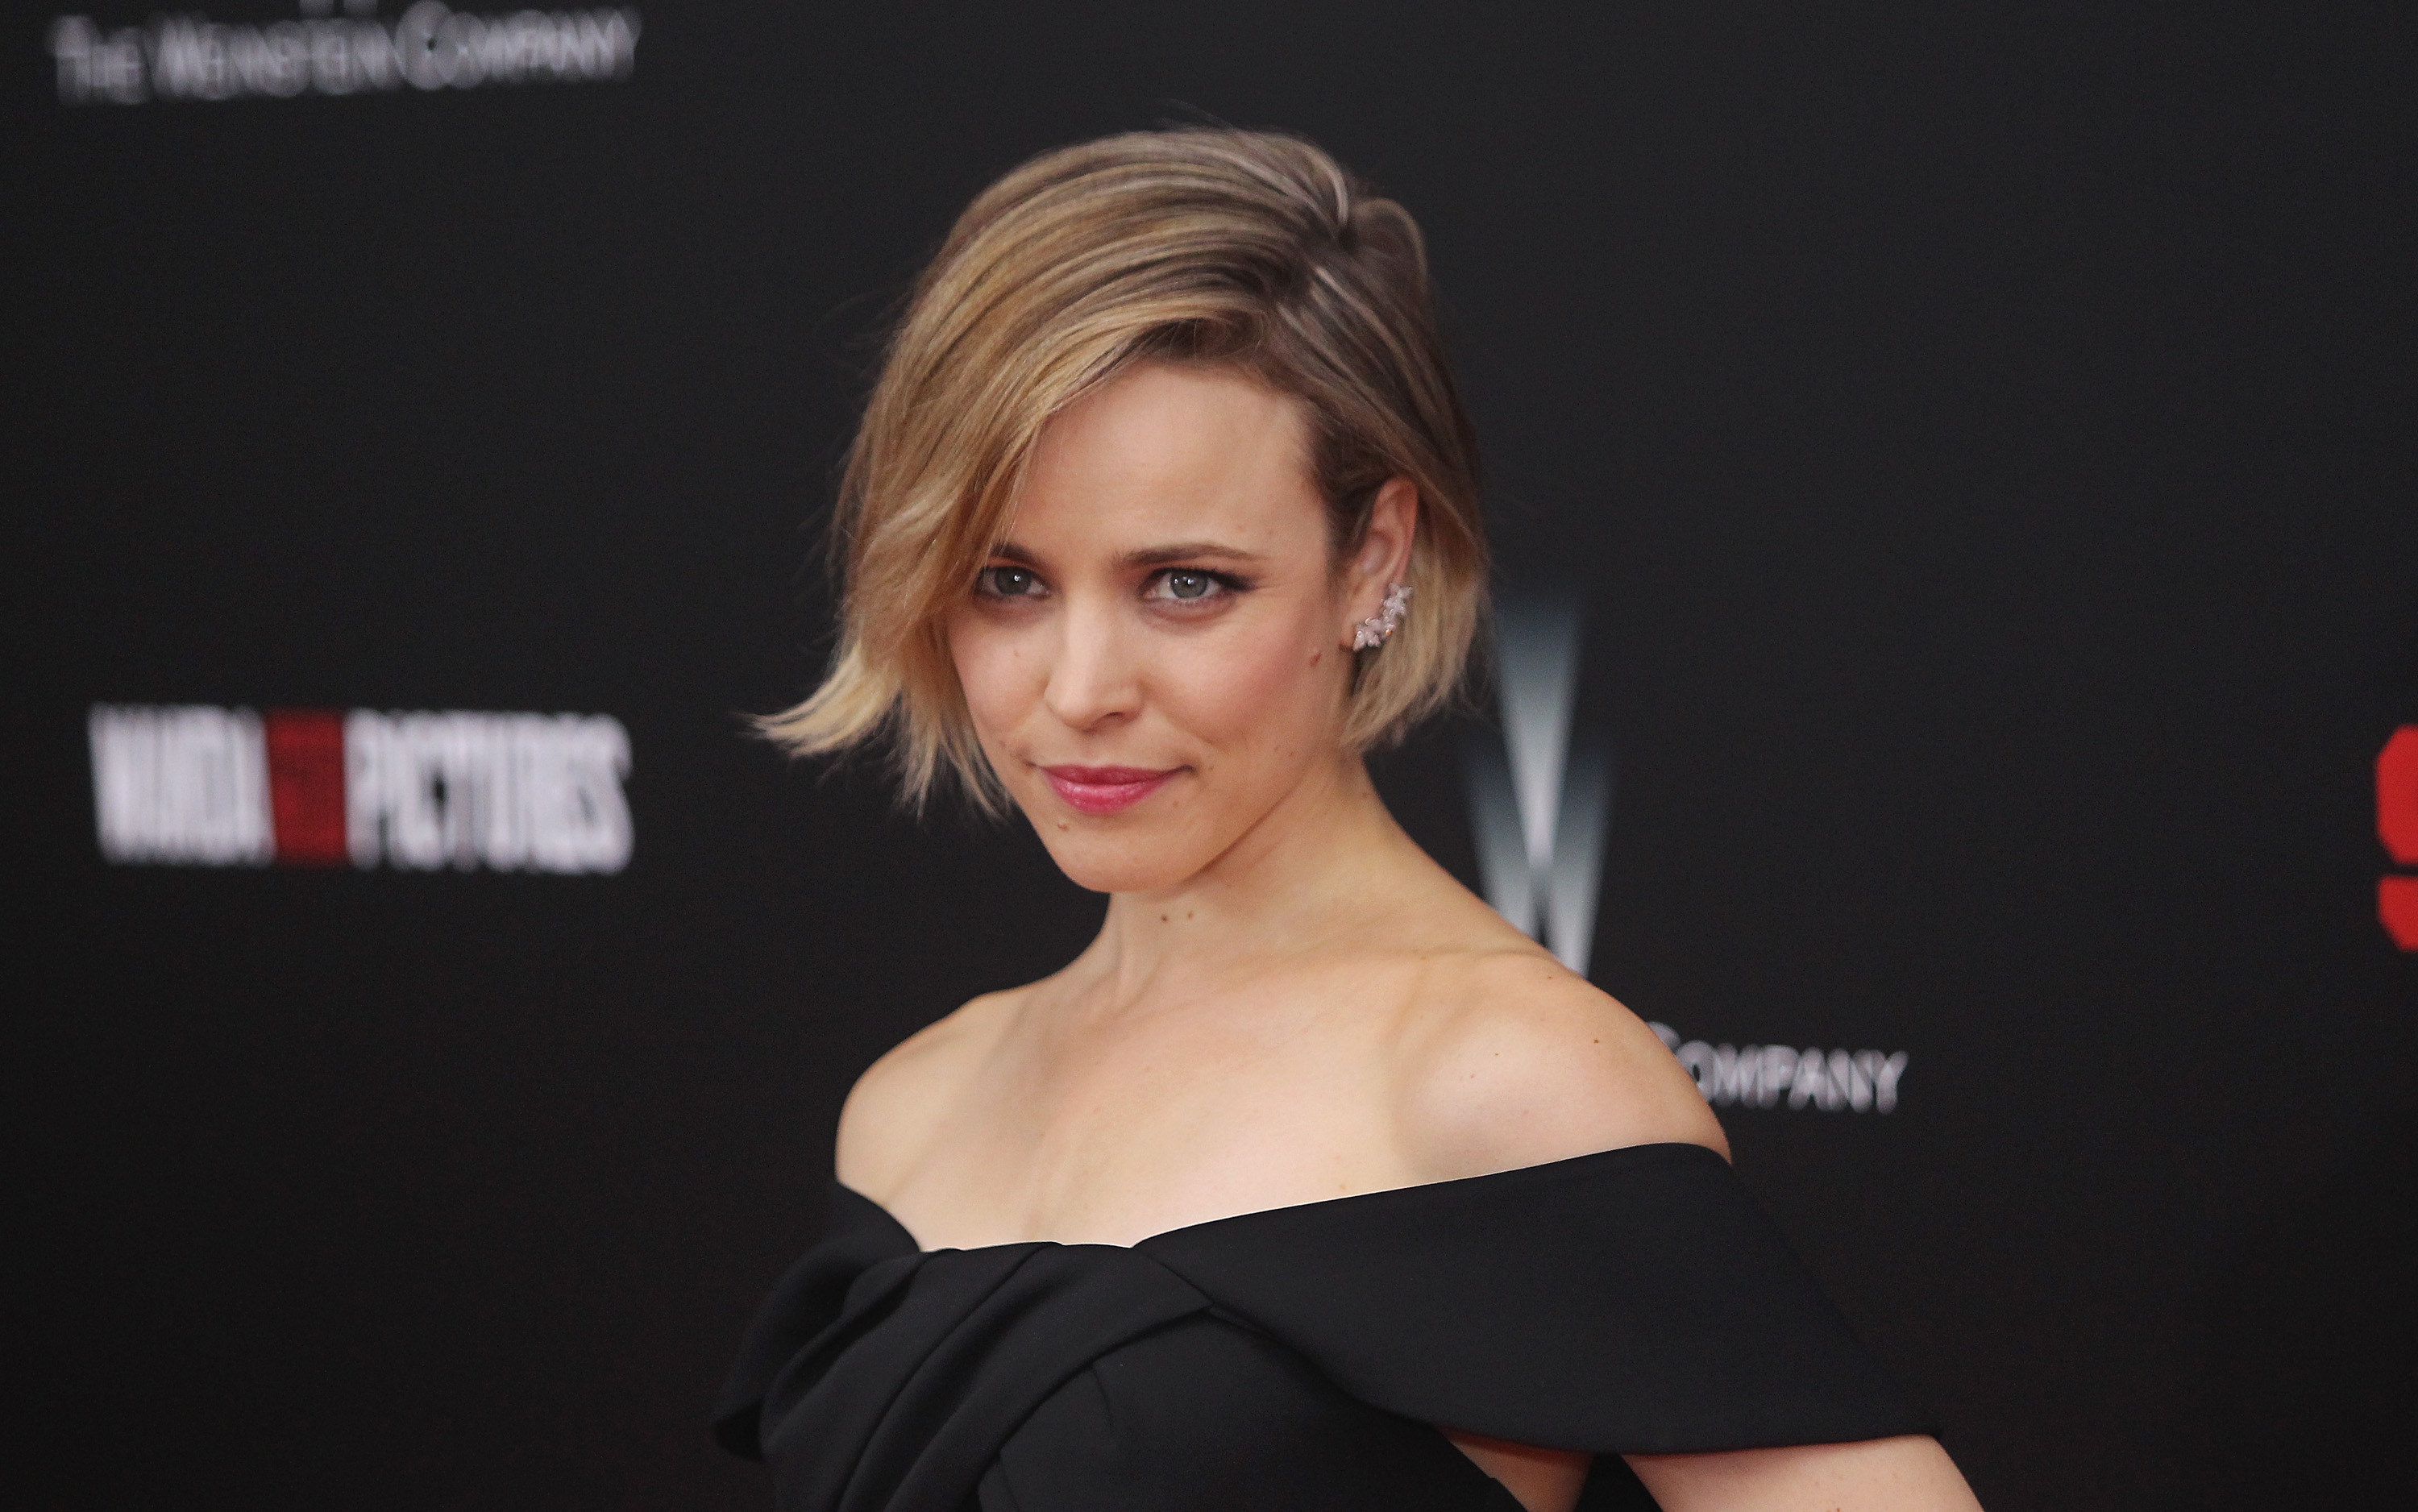 Rachel McAdams attends the "Southpaw" New York premiere at AMC Loews Lincoln Square on July 20, 2015 in New York City. (Jim Spellman&mdash;WireImage)